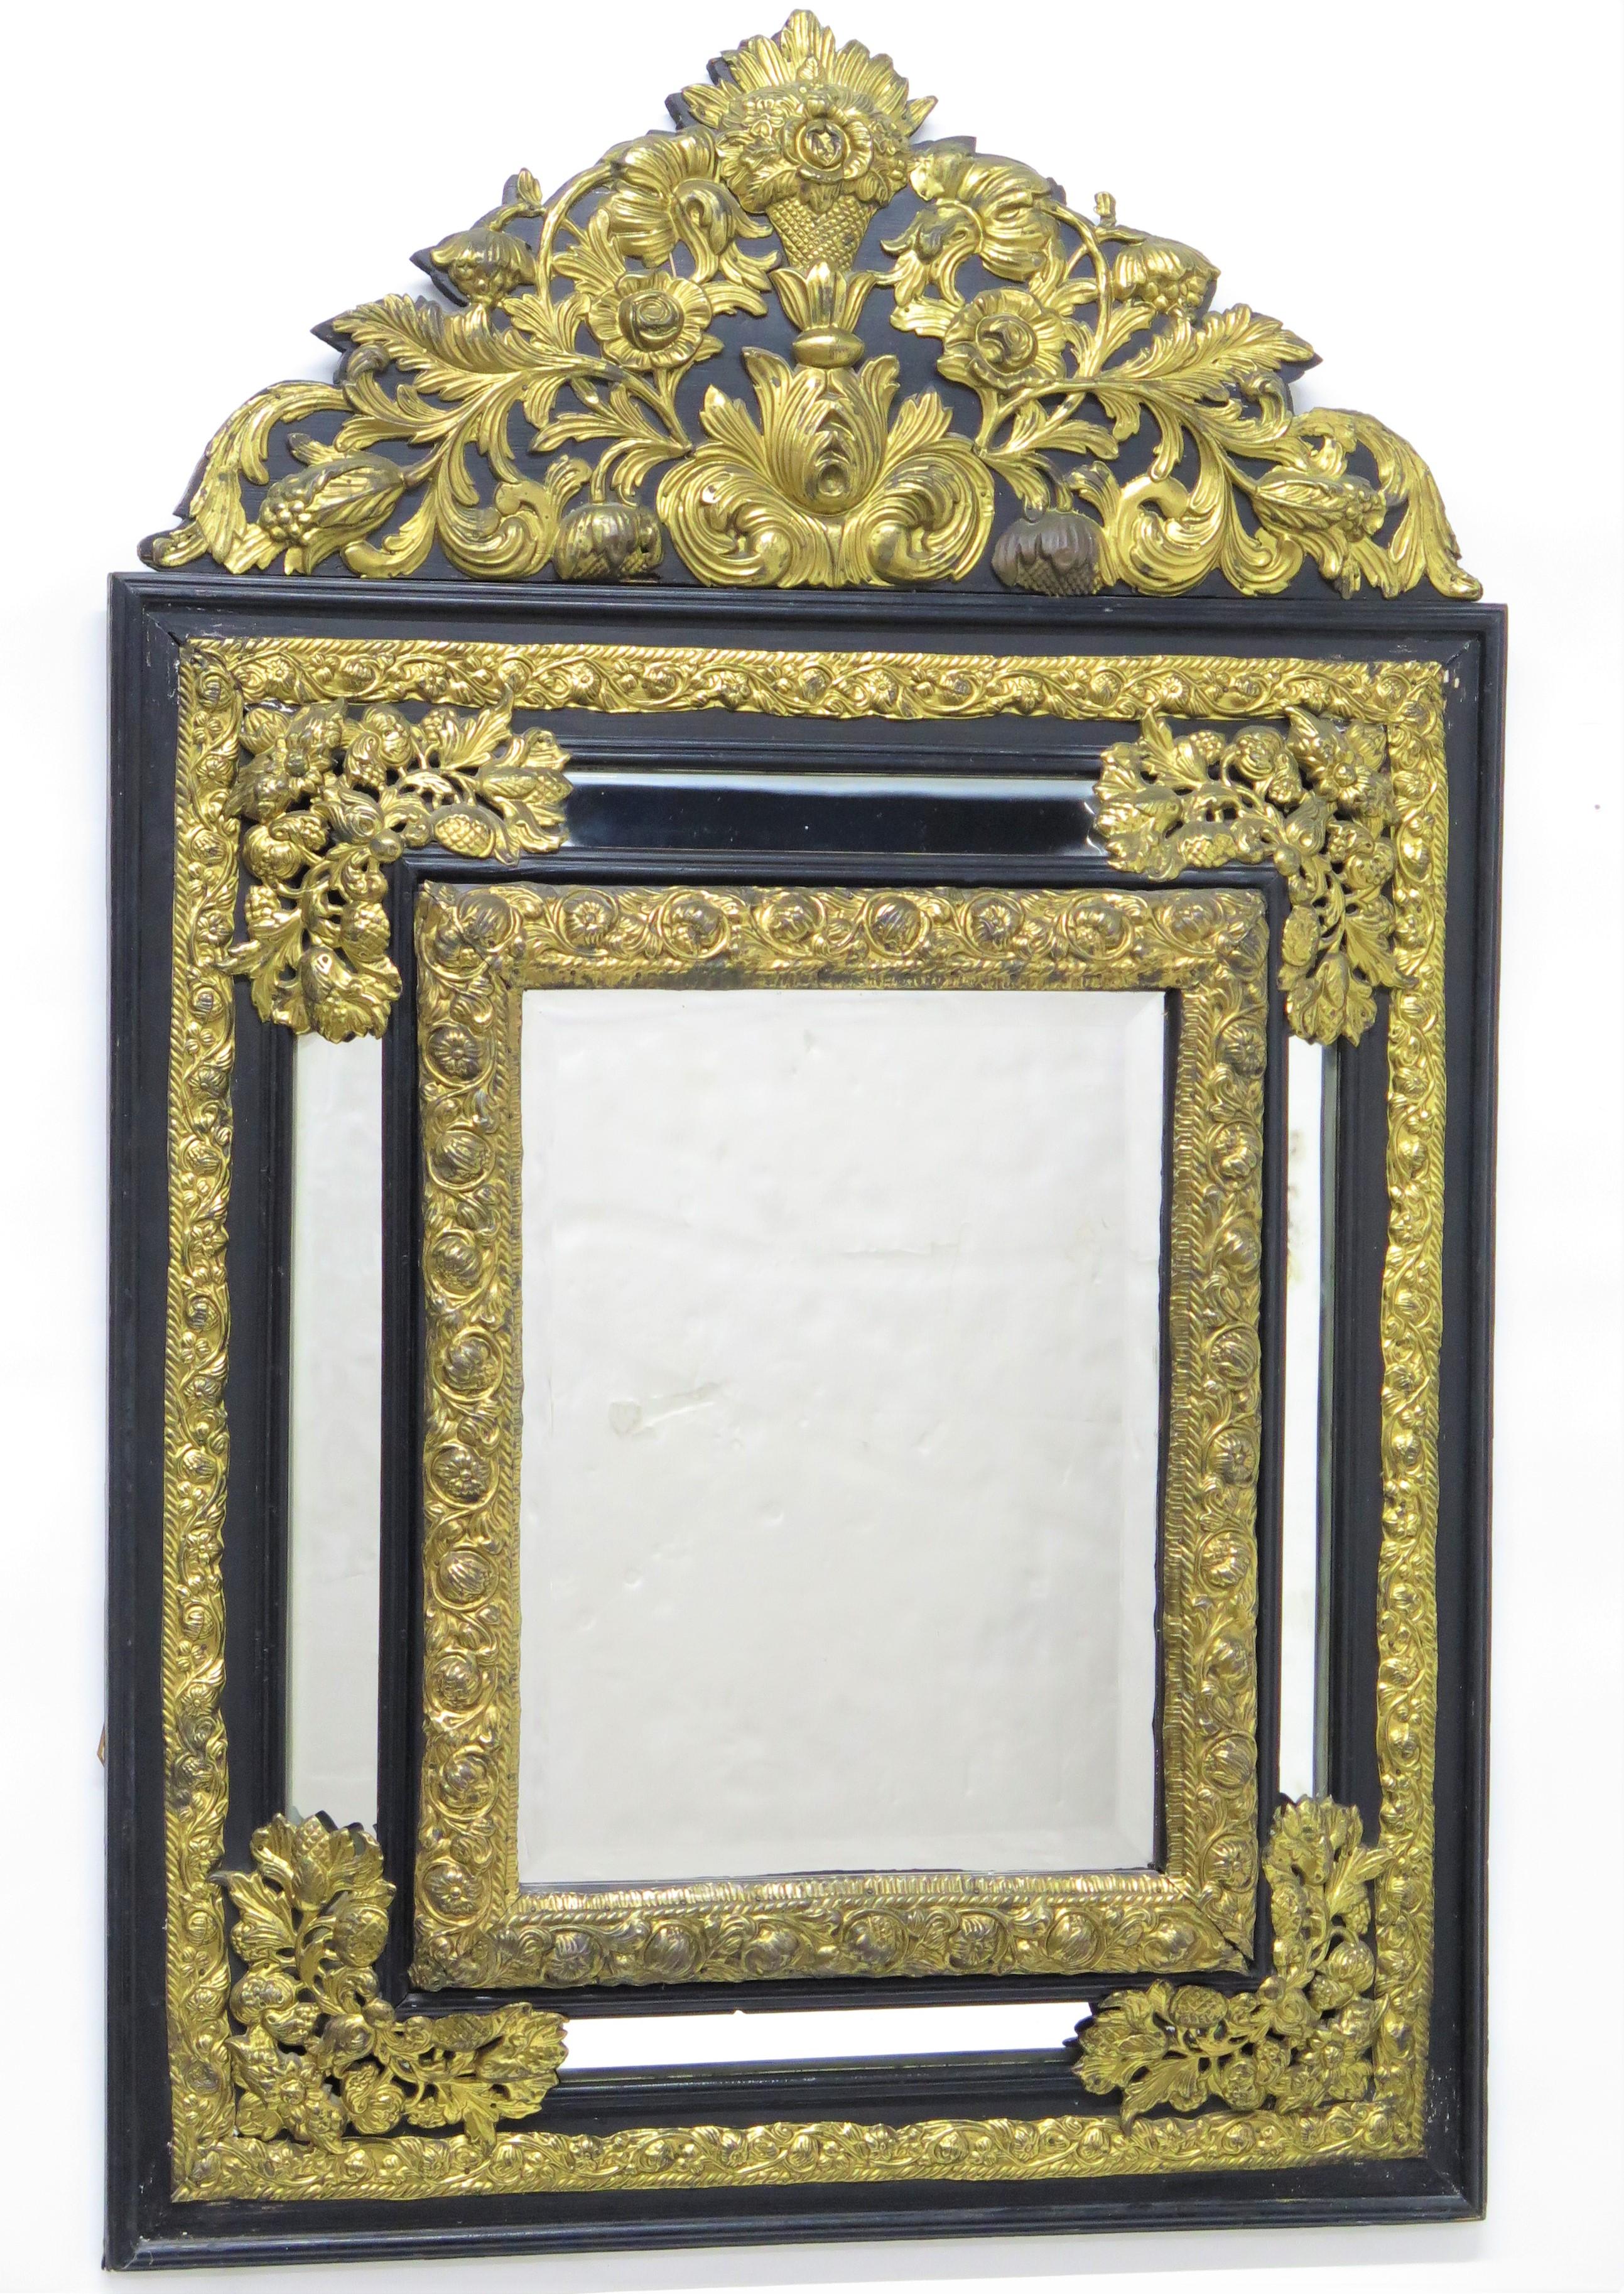 Dutch Looking Glass of Ebony and Brass Repoussé For Sale 6